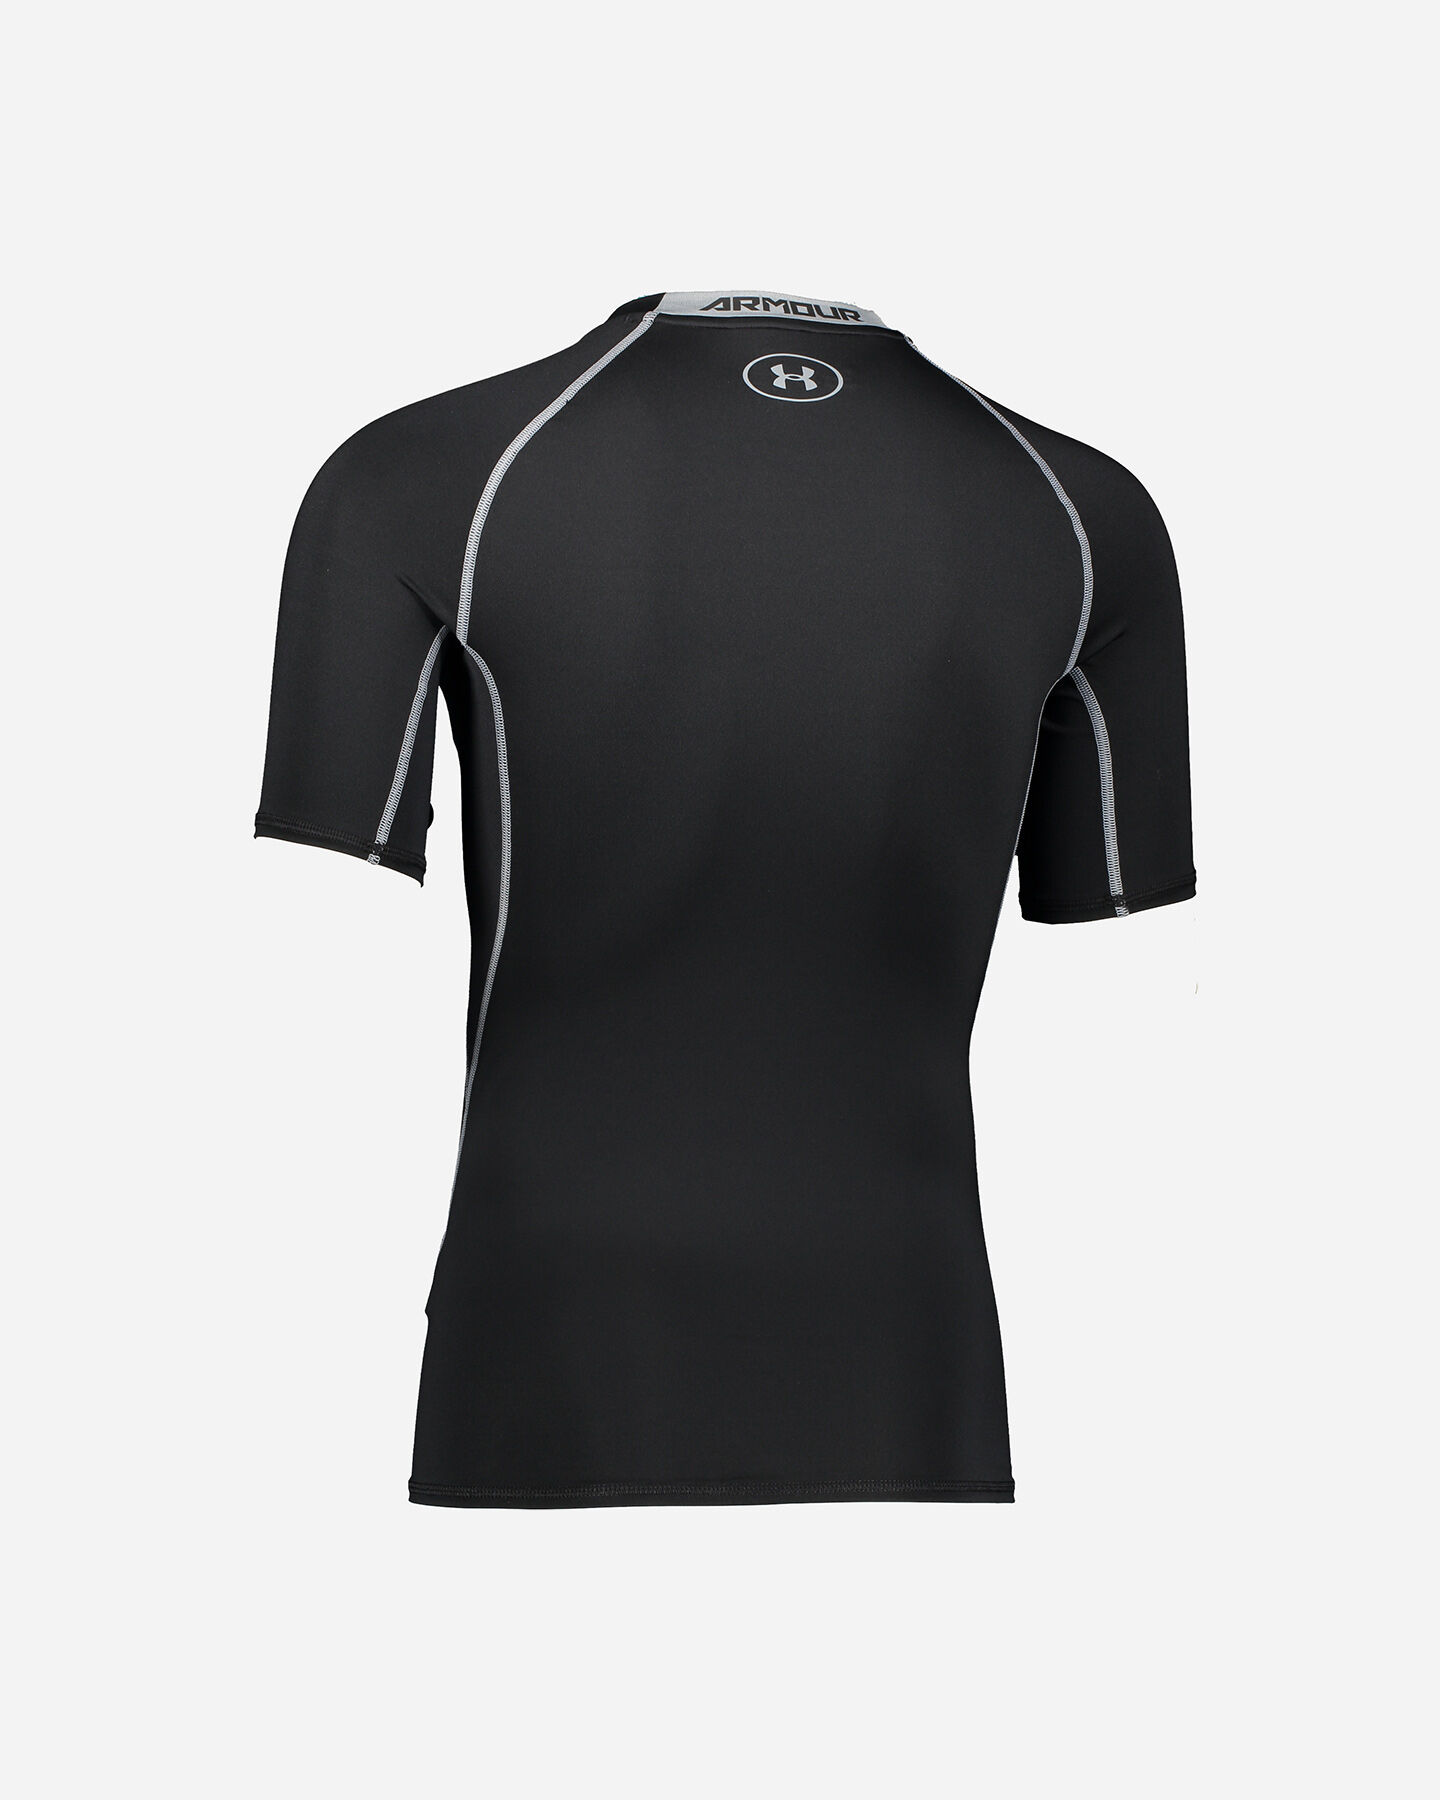  T-Shirt training UNDER ARMOUR COMPRESSION M S5031196|0001|SM scatto 1